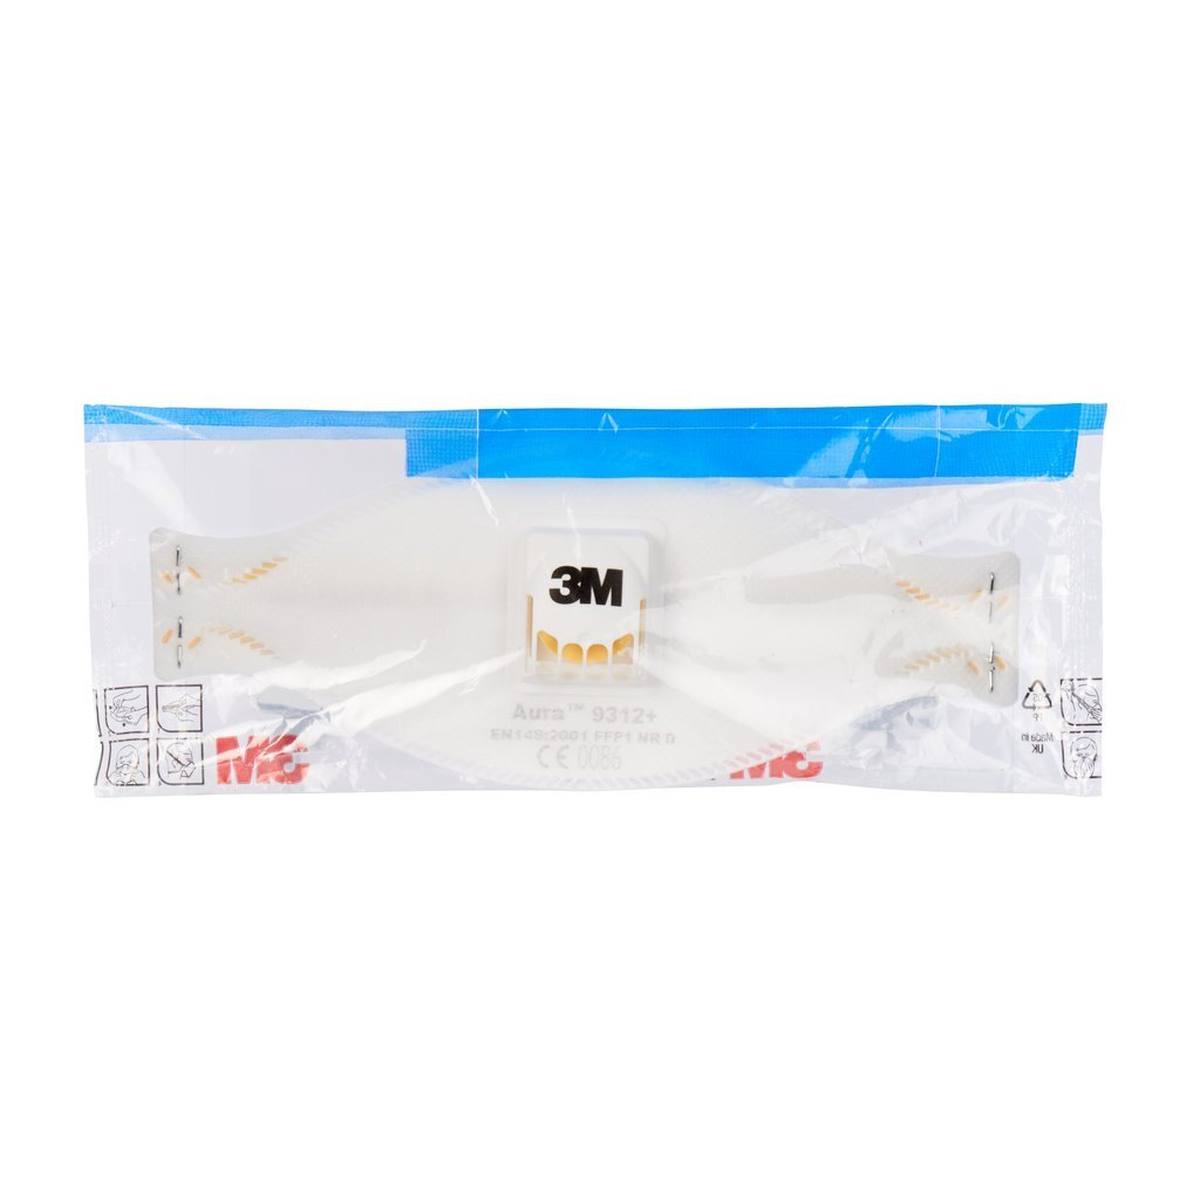 3M 9312+ Aura respirator FFP1 with cool-flow exhalation valve, up to 4 times the limit value (hygienically individually packaged)